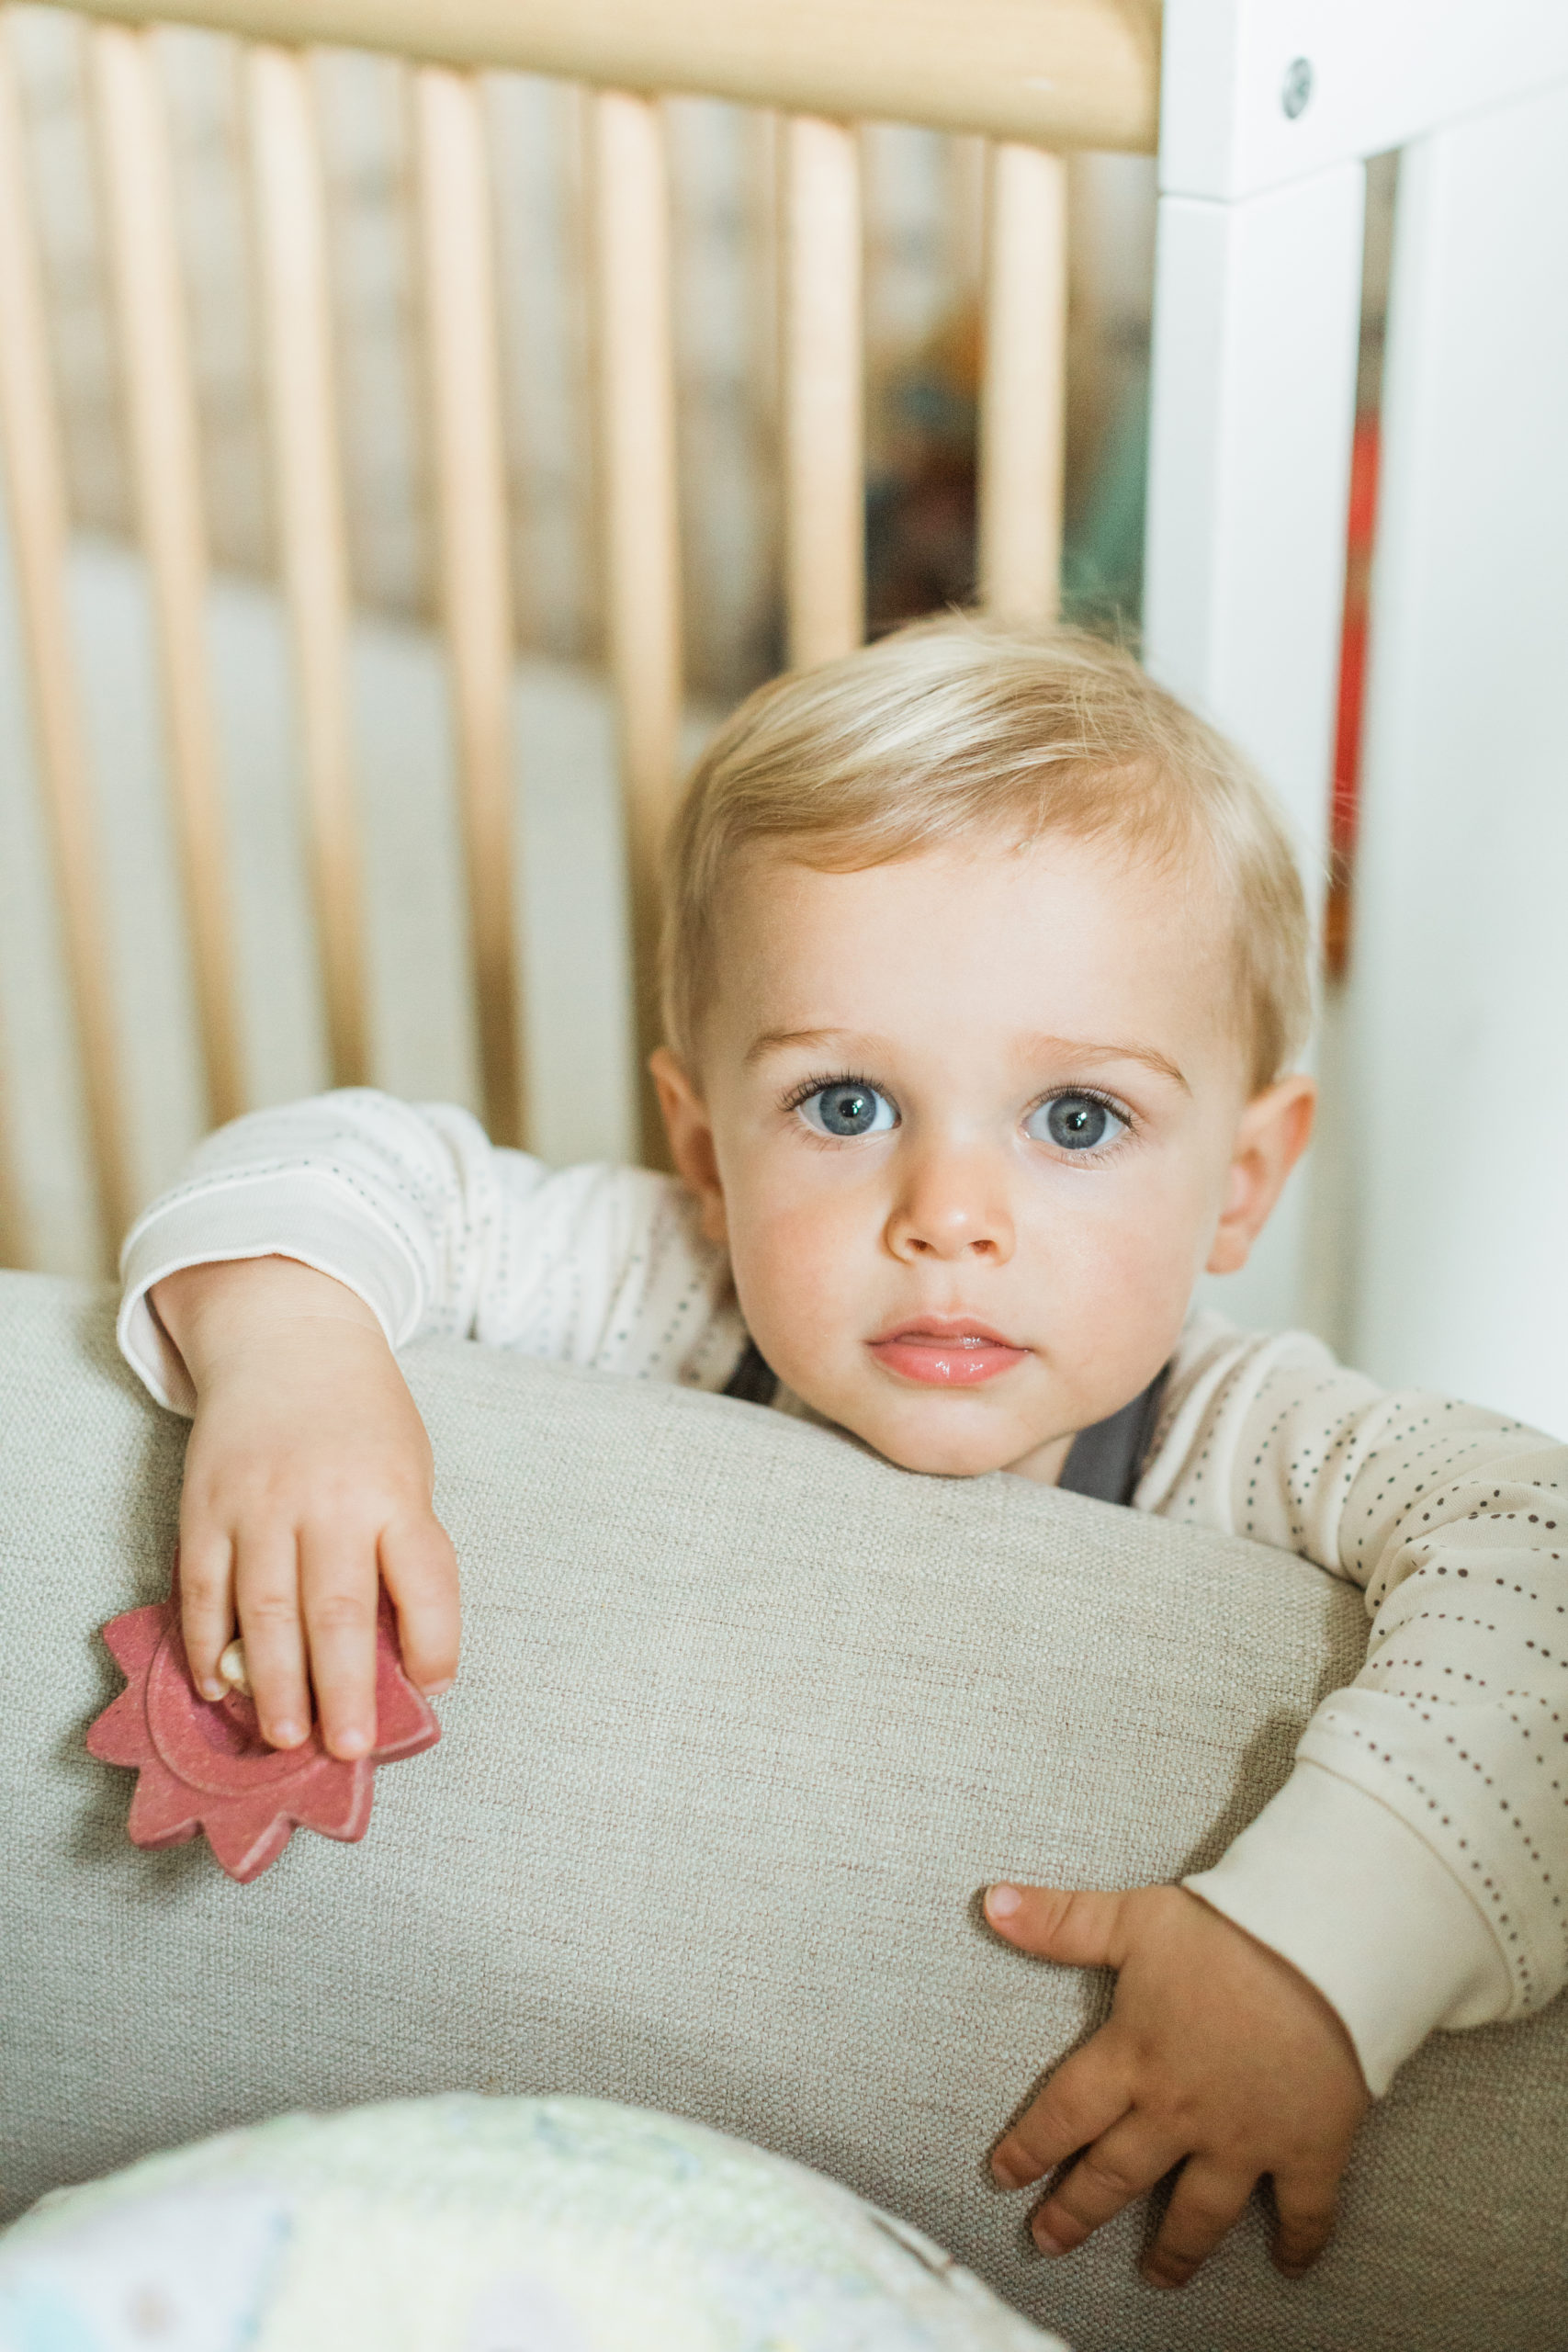 One year old baby boy with blue eyes staring at camera. Little boy leaning on cream couch wearing grey overalls and cream long sleeve.